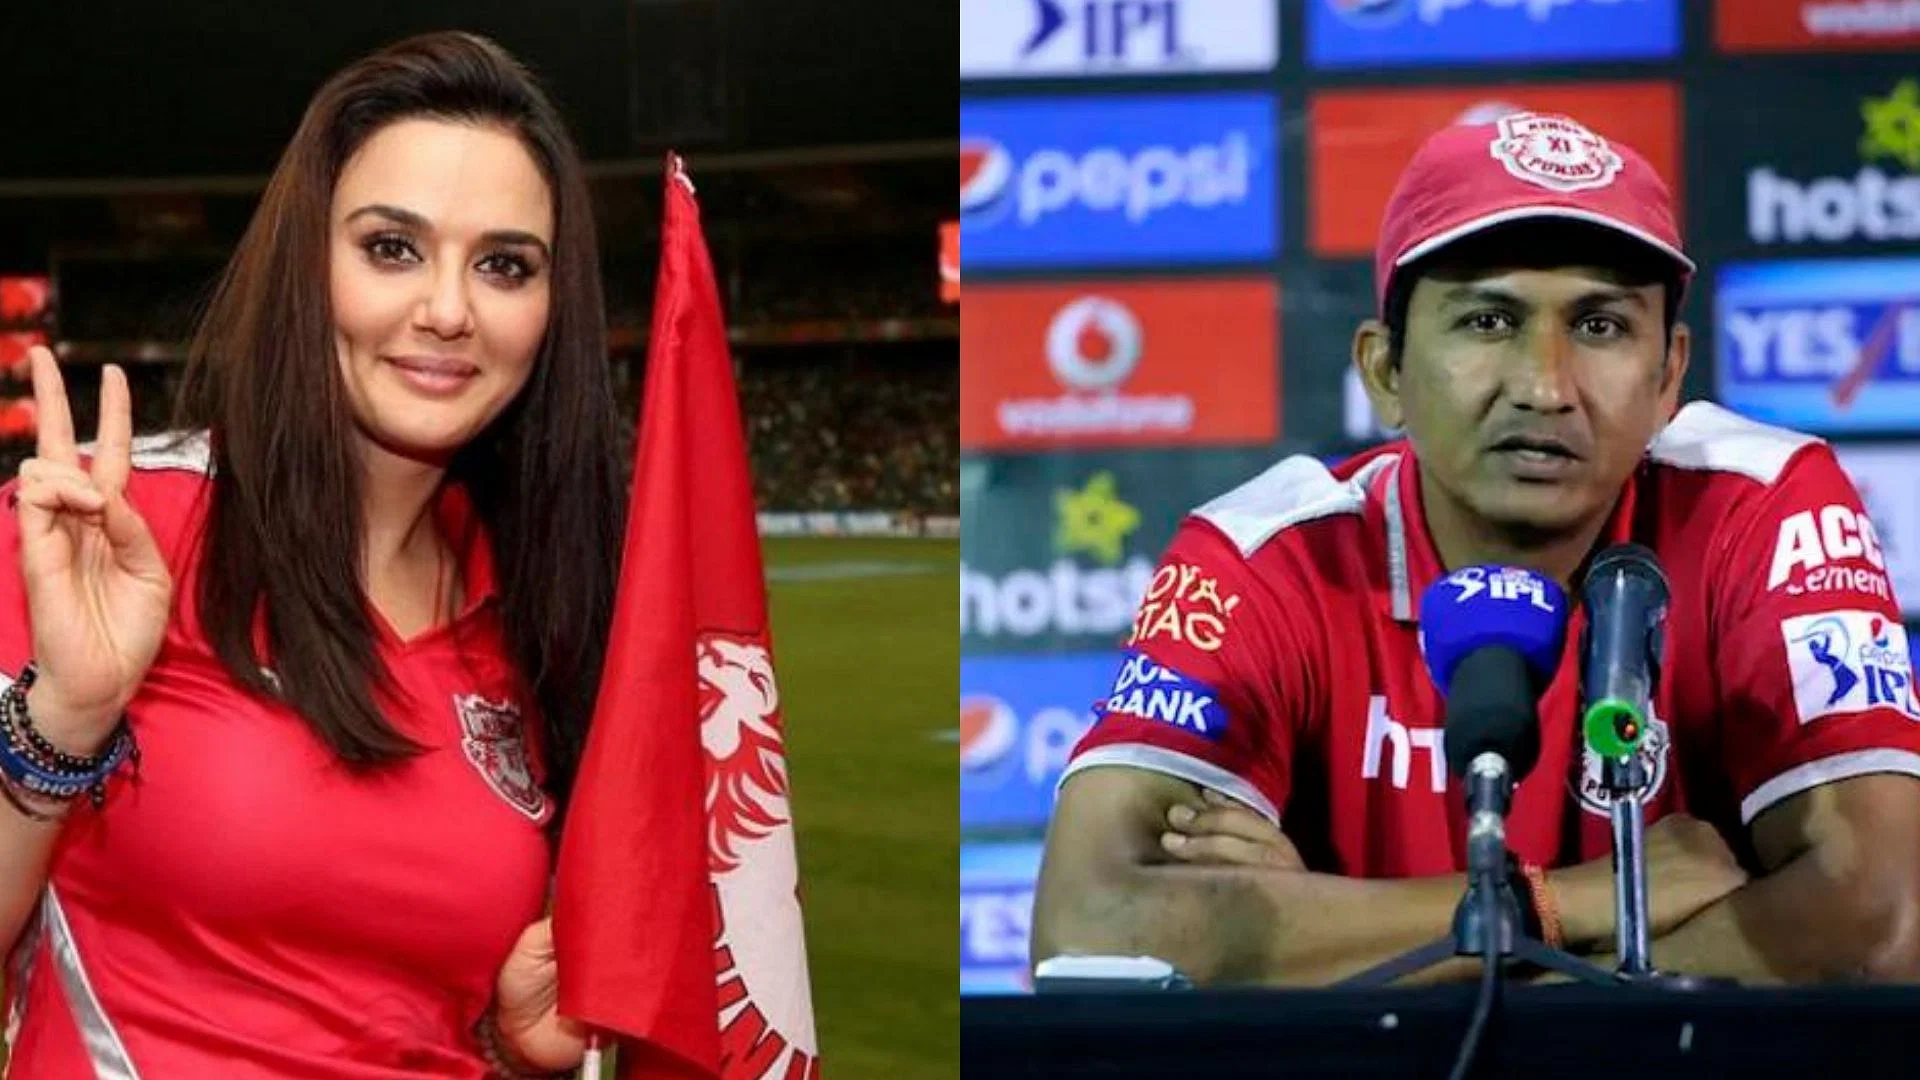 Preity Zinta Allegedly Threatened To Remove Coach Sanjay Bangar In Front Of Kings XI Punjab Players During IPL 2016